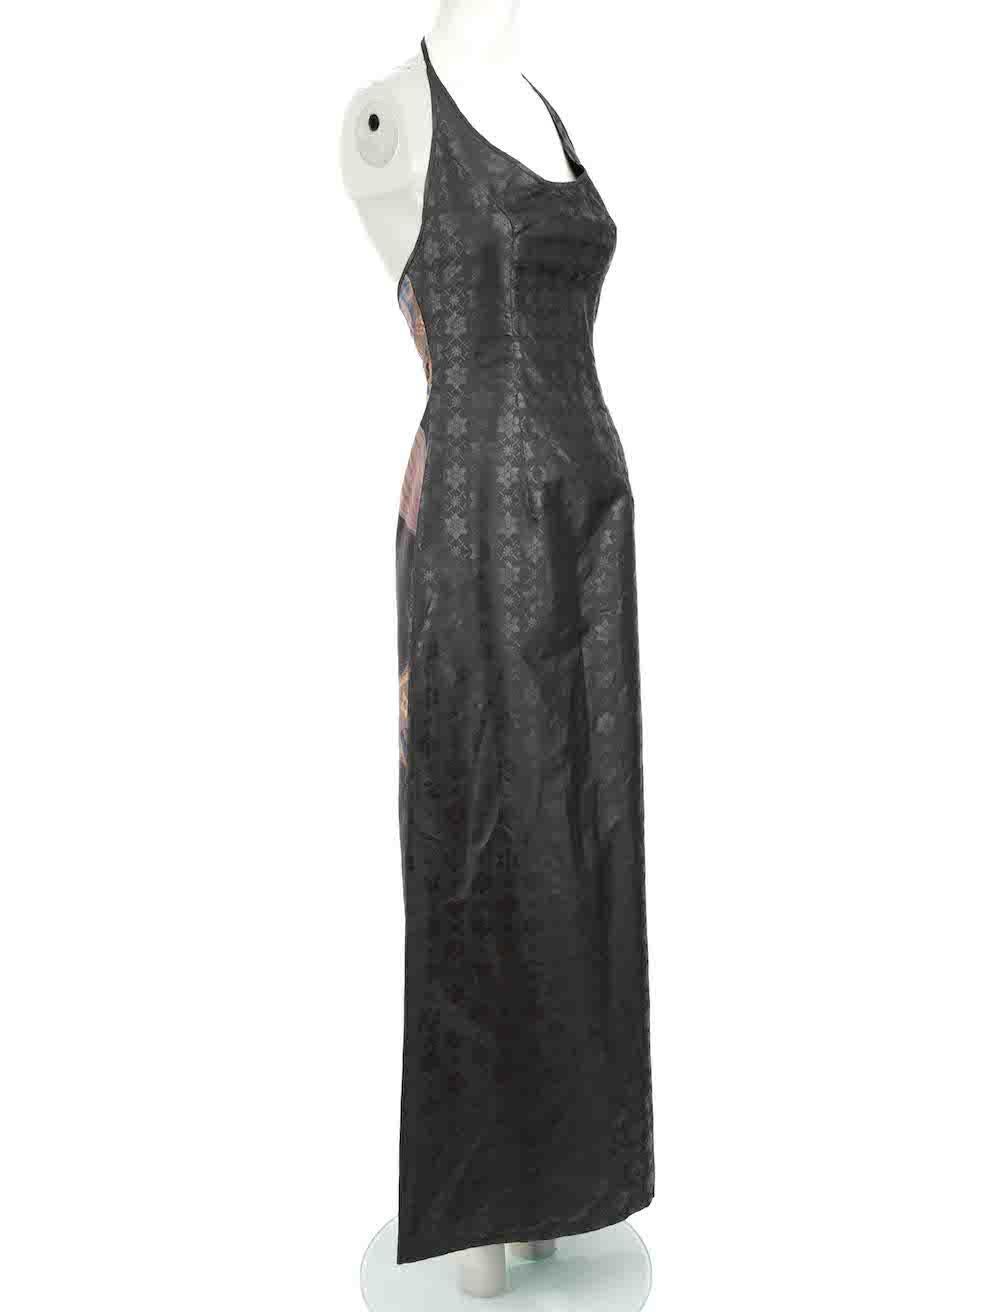 CONDITION is Very good. Hardly any visible wear to dress is evident on this used Nagara for Jim Thompson designer resale item.
 
Details
Multicolour
Silk
Maxi dress
Open back
Abstract printed pattern
Halterneck
Side zip closure with hook and eye
